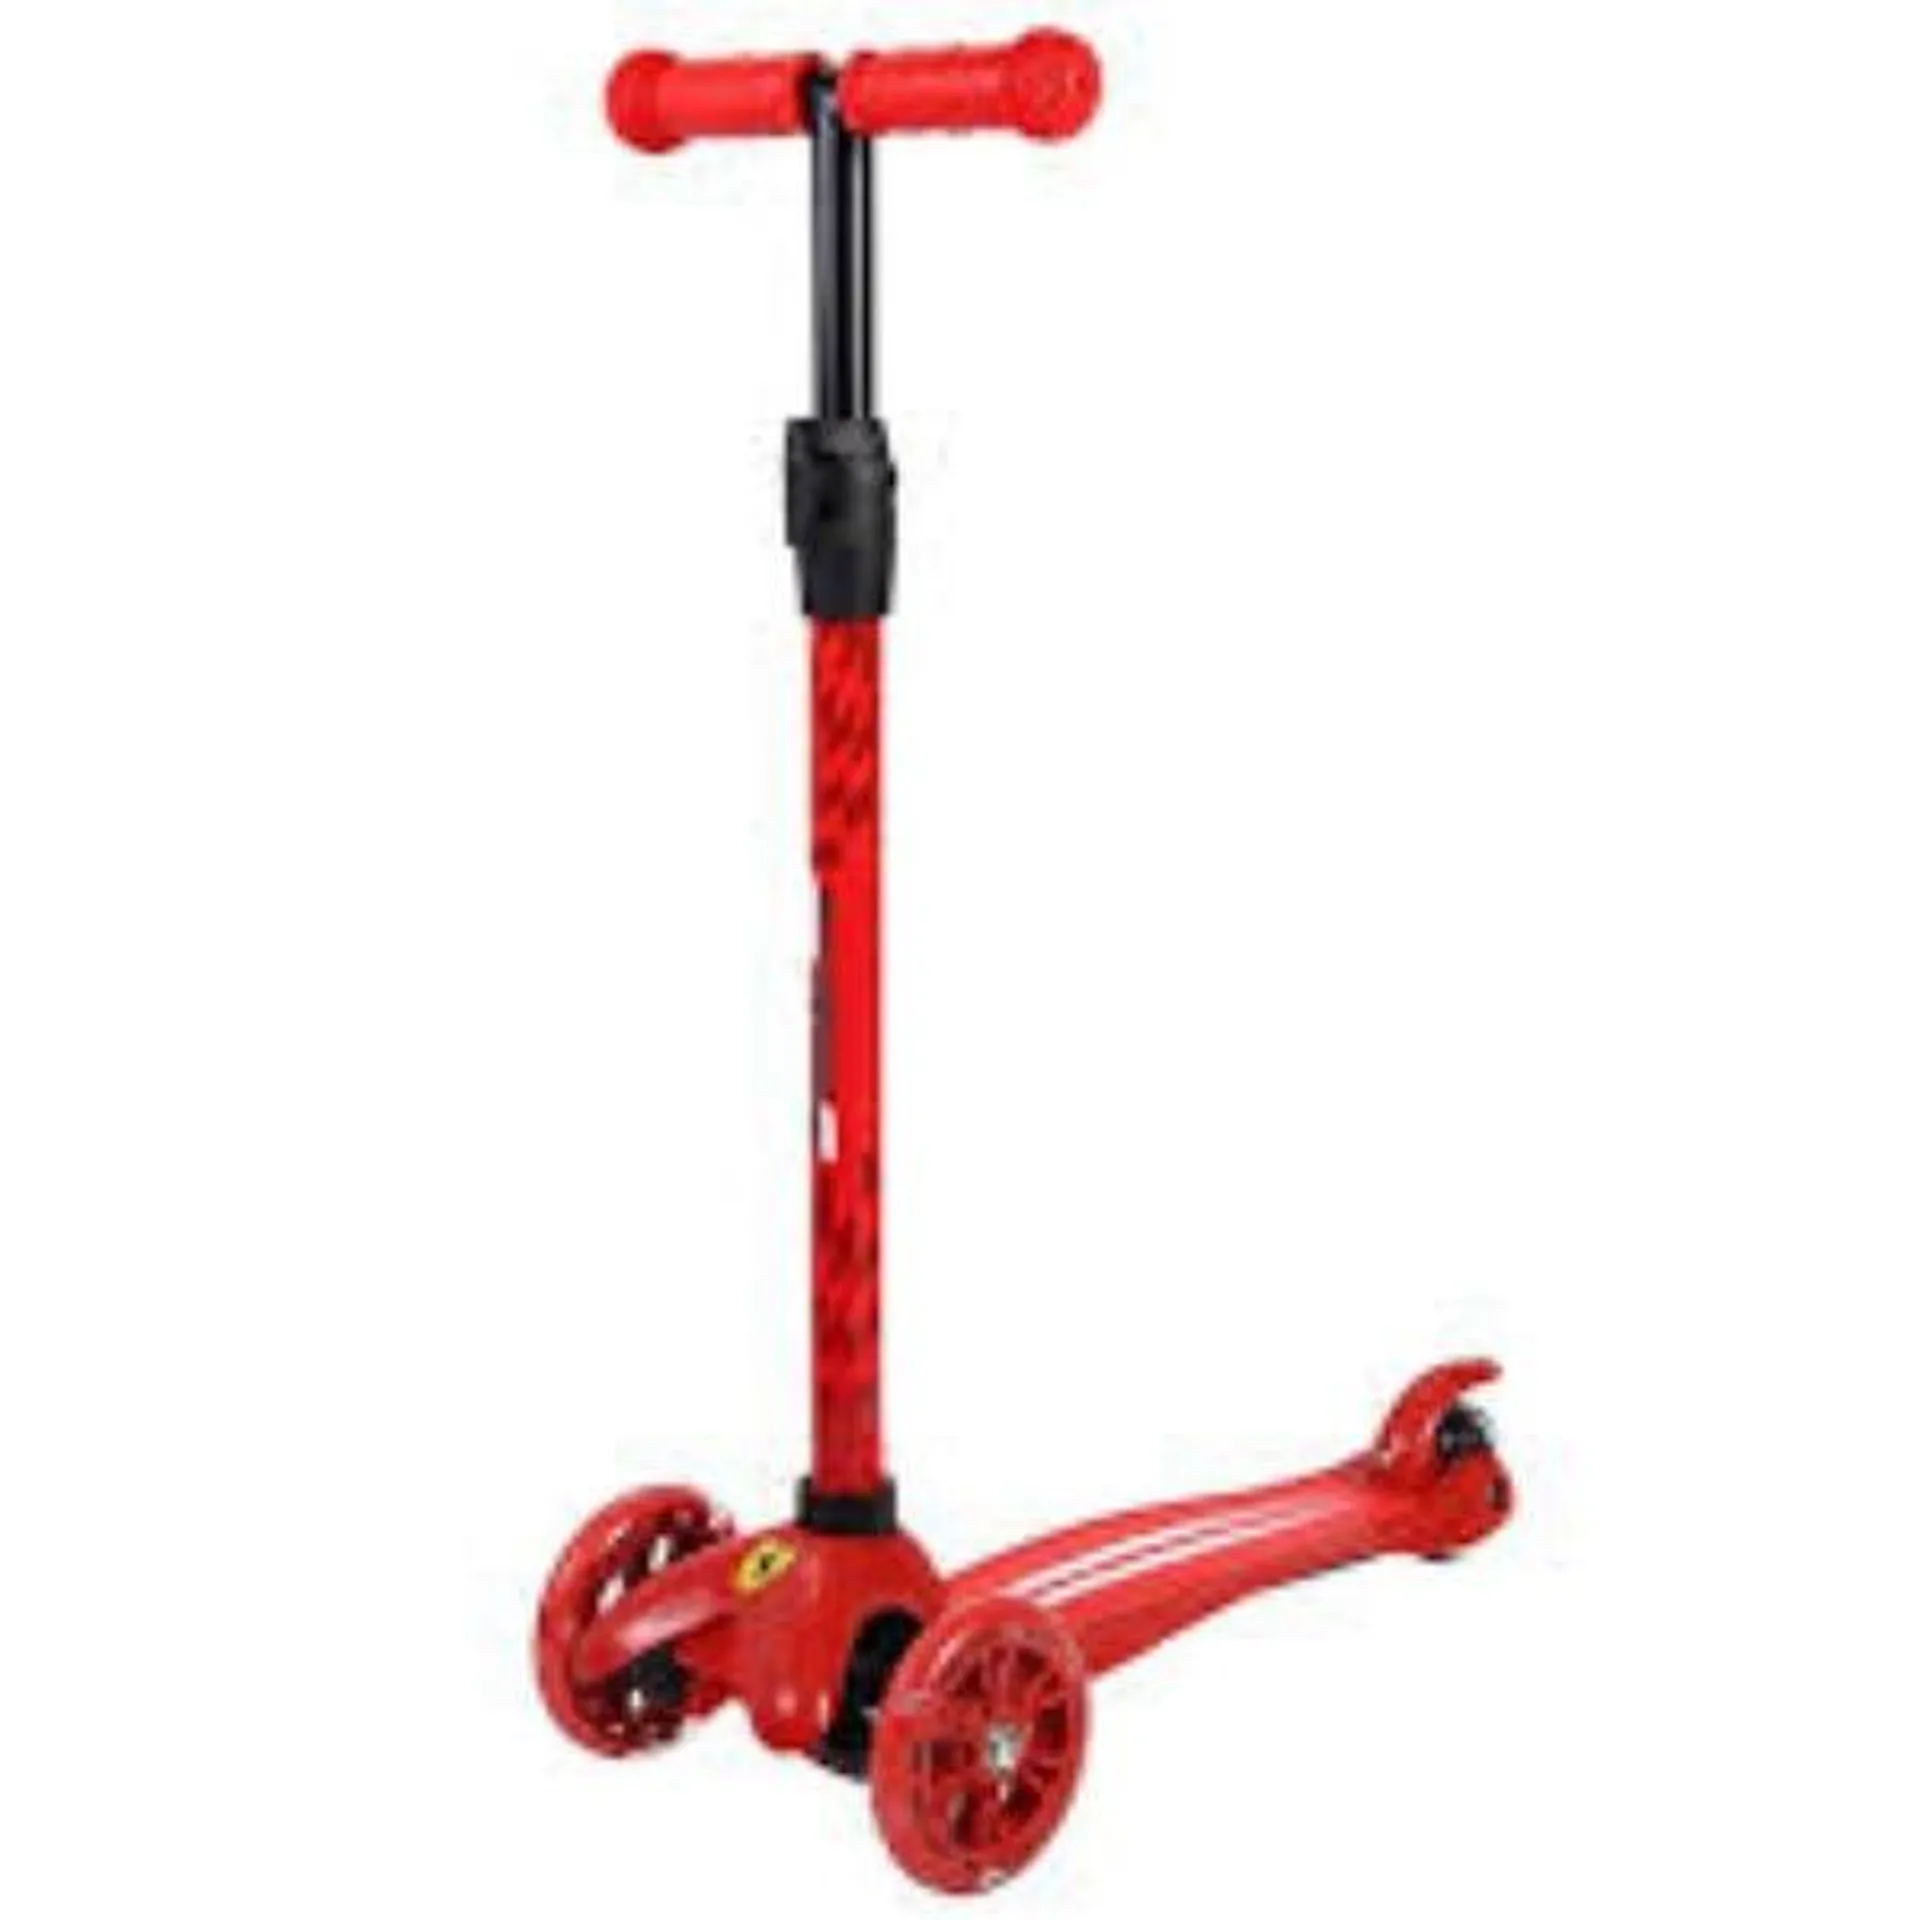 Ferrari Twist Scooter With Led Lights - Red